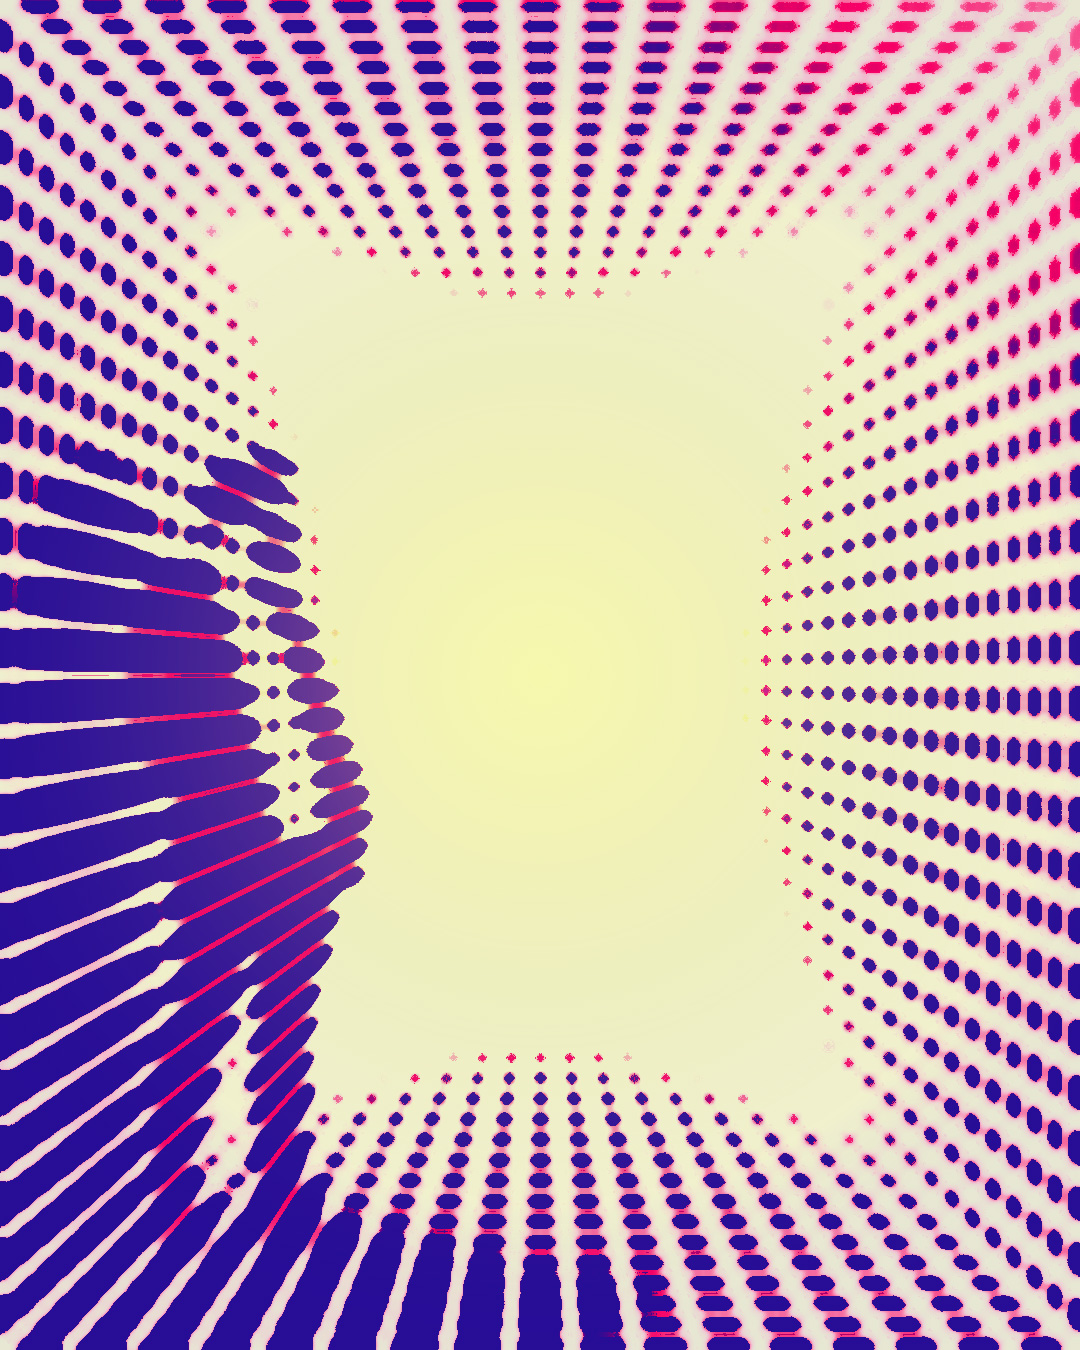 Abstract dot pattern showing man in cube